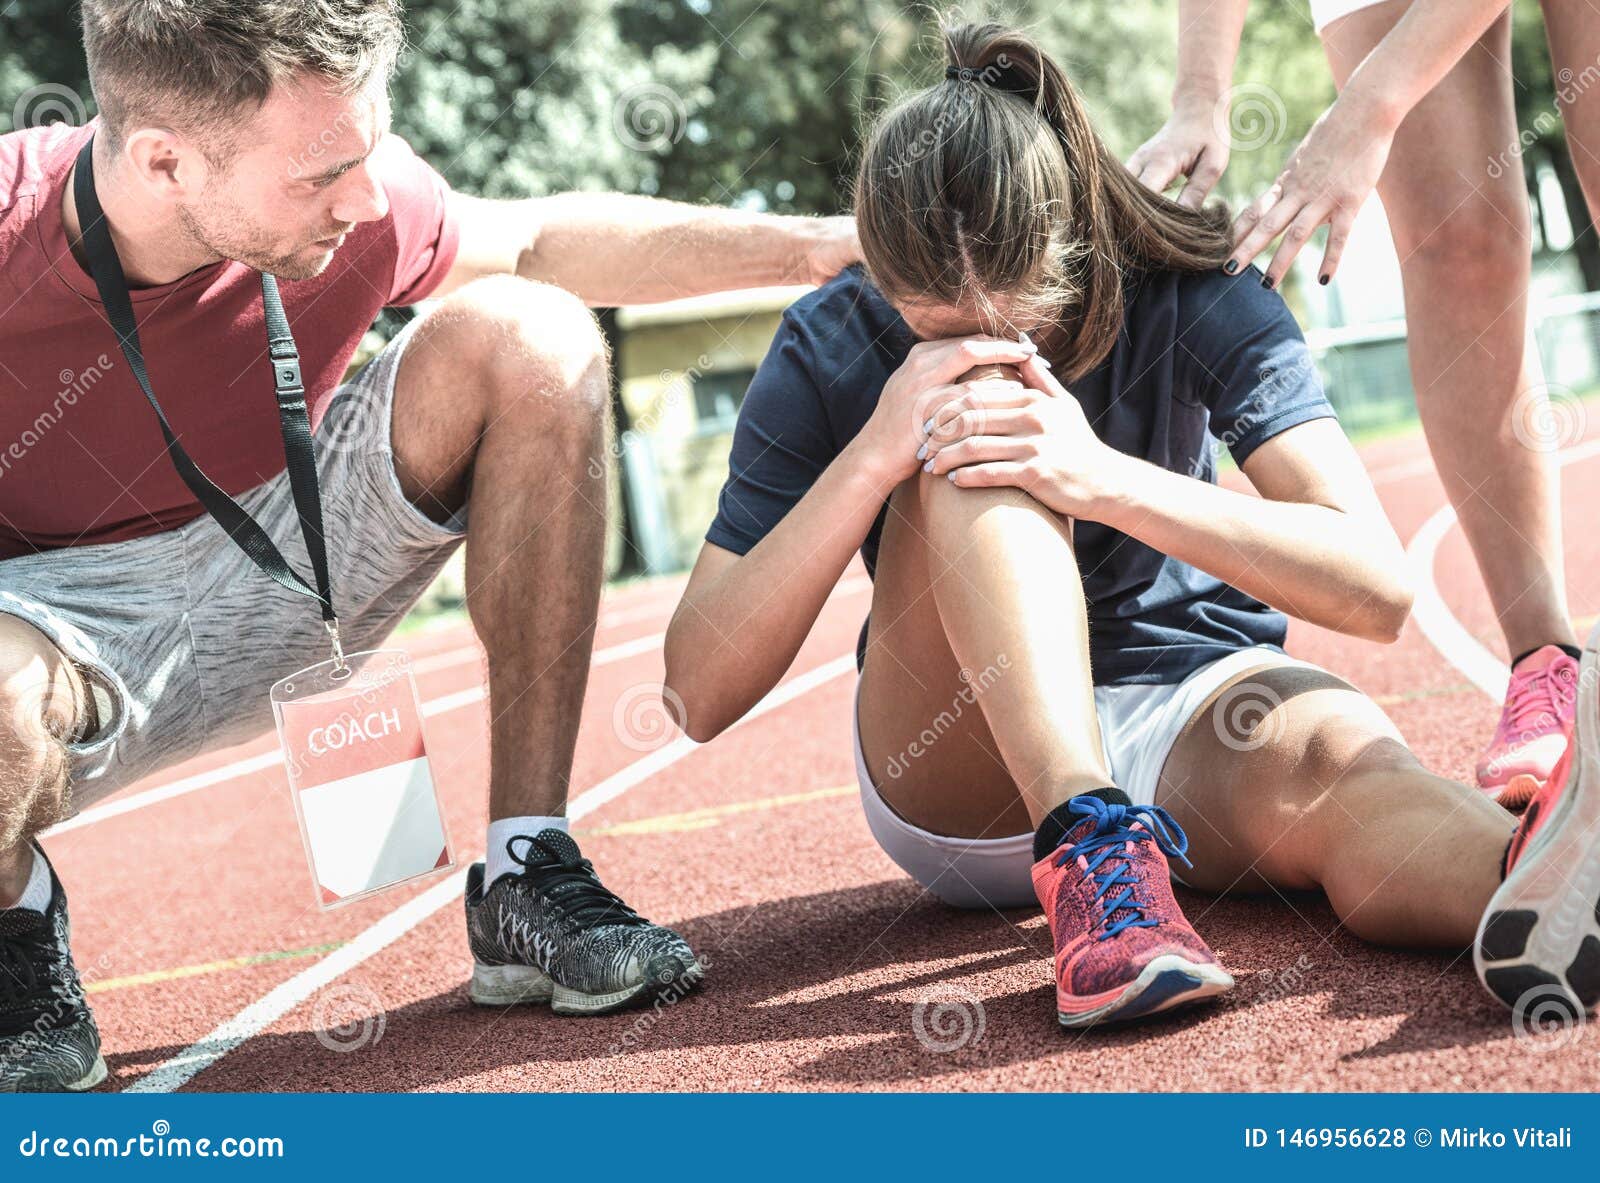 female athlete getting injured during athletic run training - male coach taking care on sport pupil after physical accident